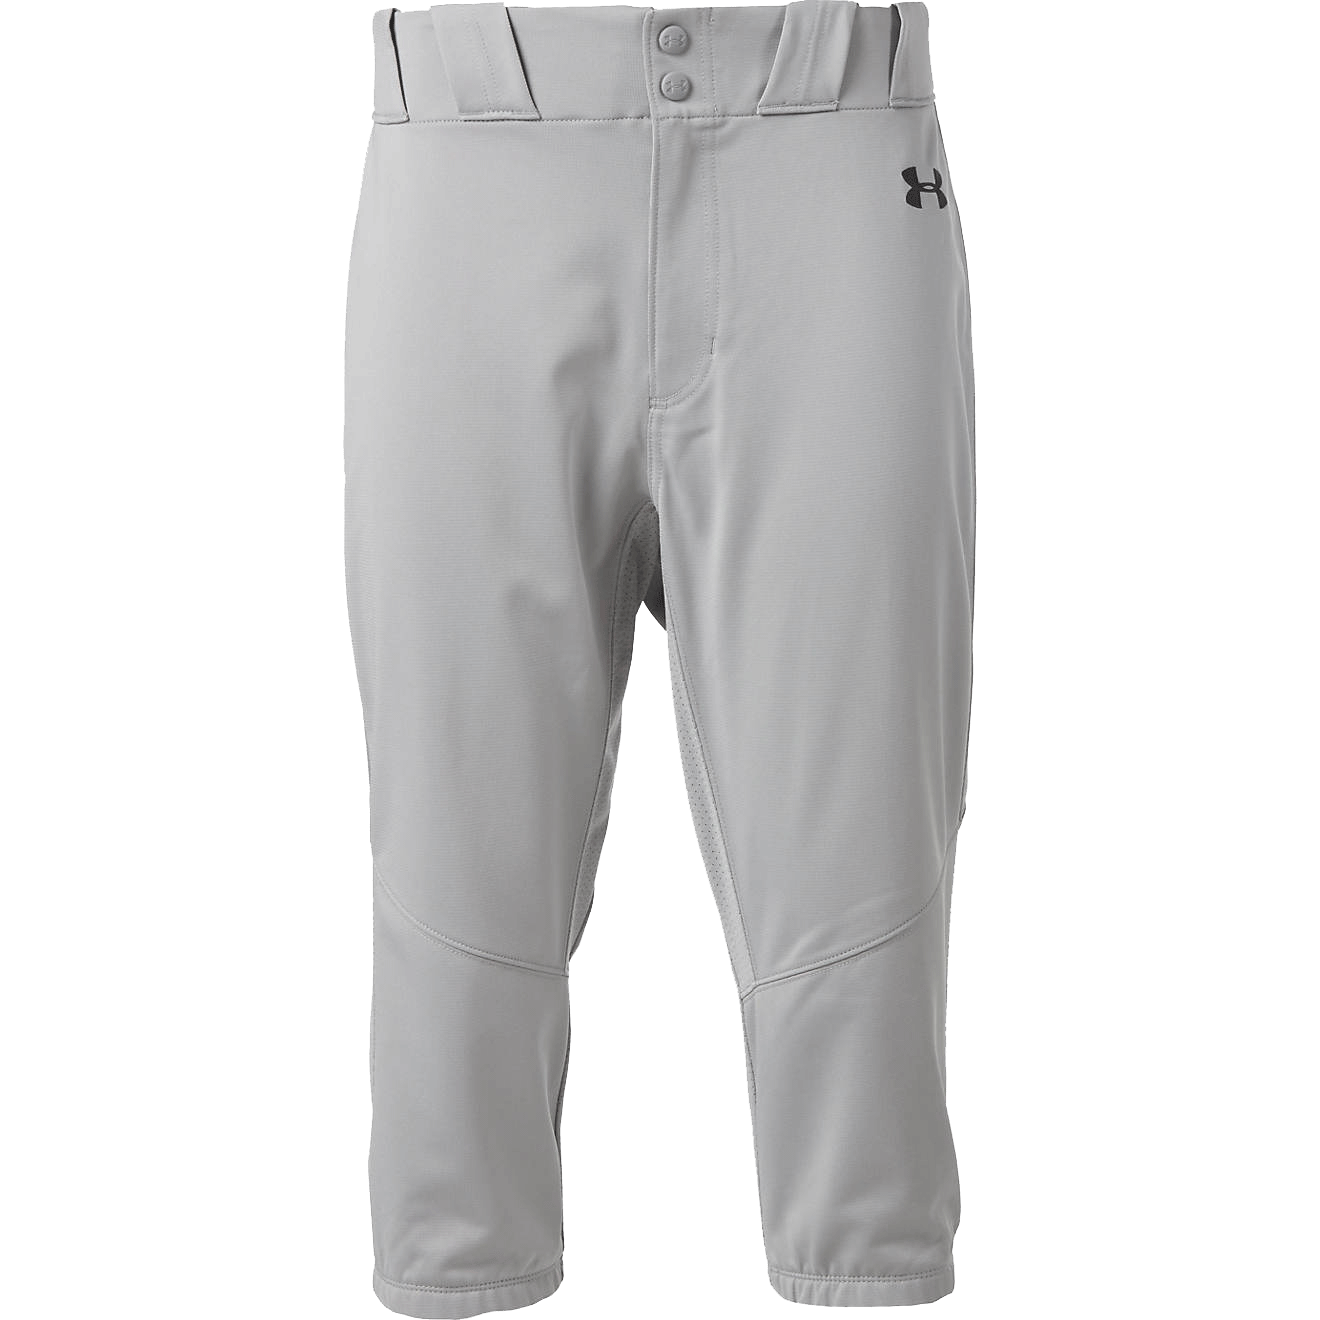 UA Girl's Ace Belted Knicker Pant